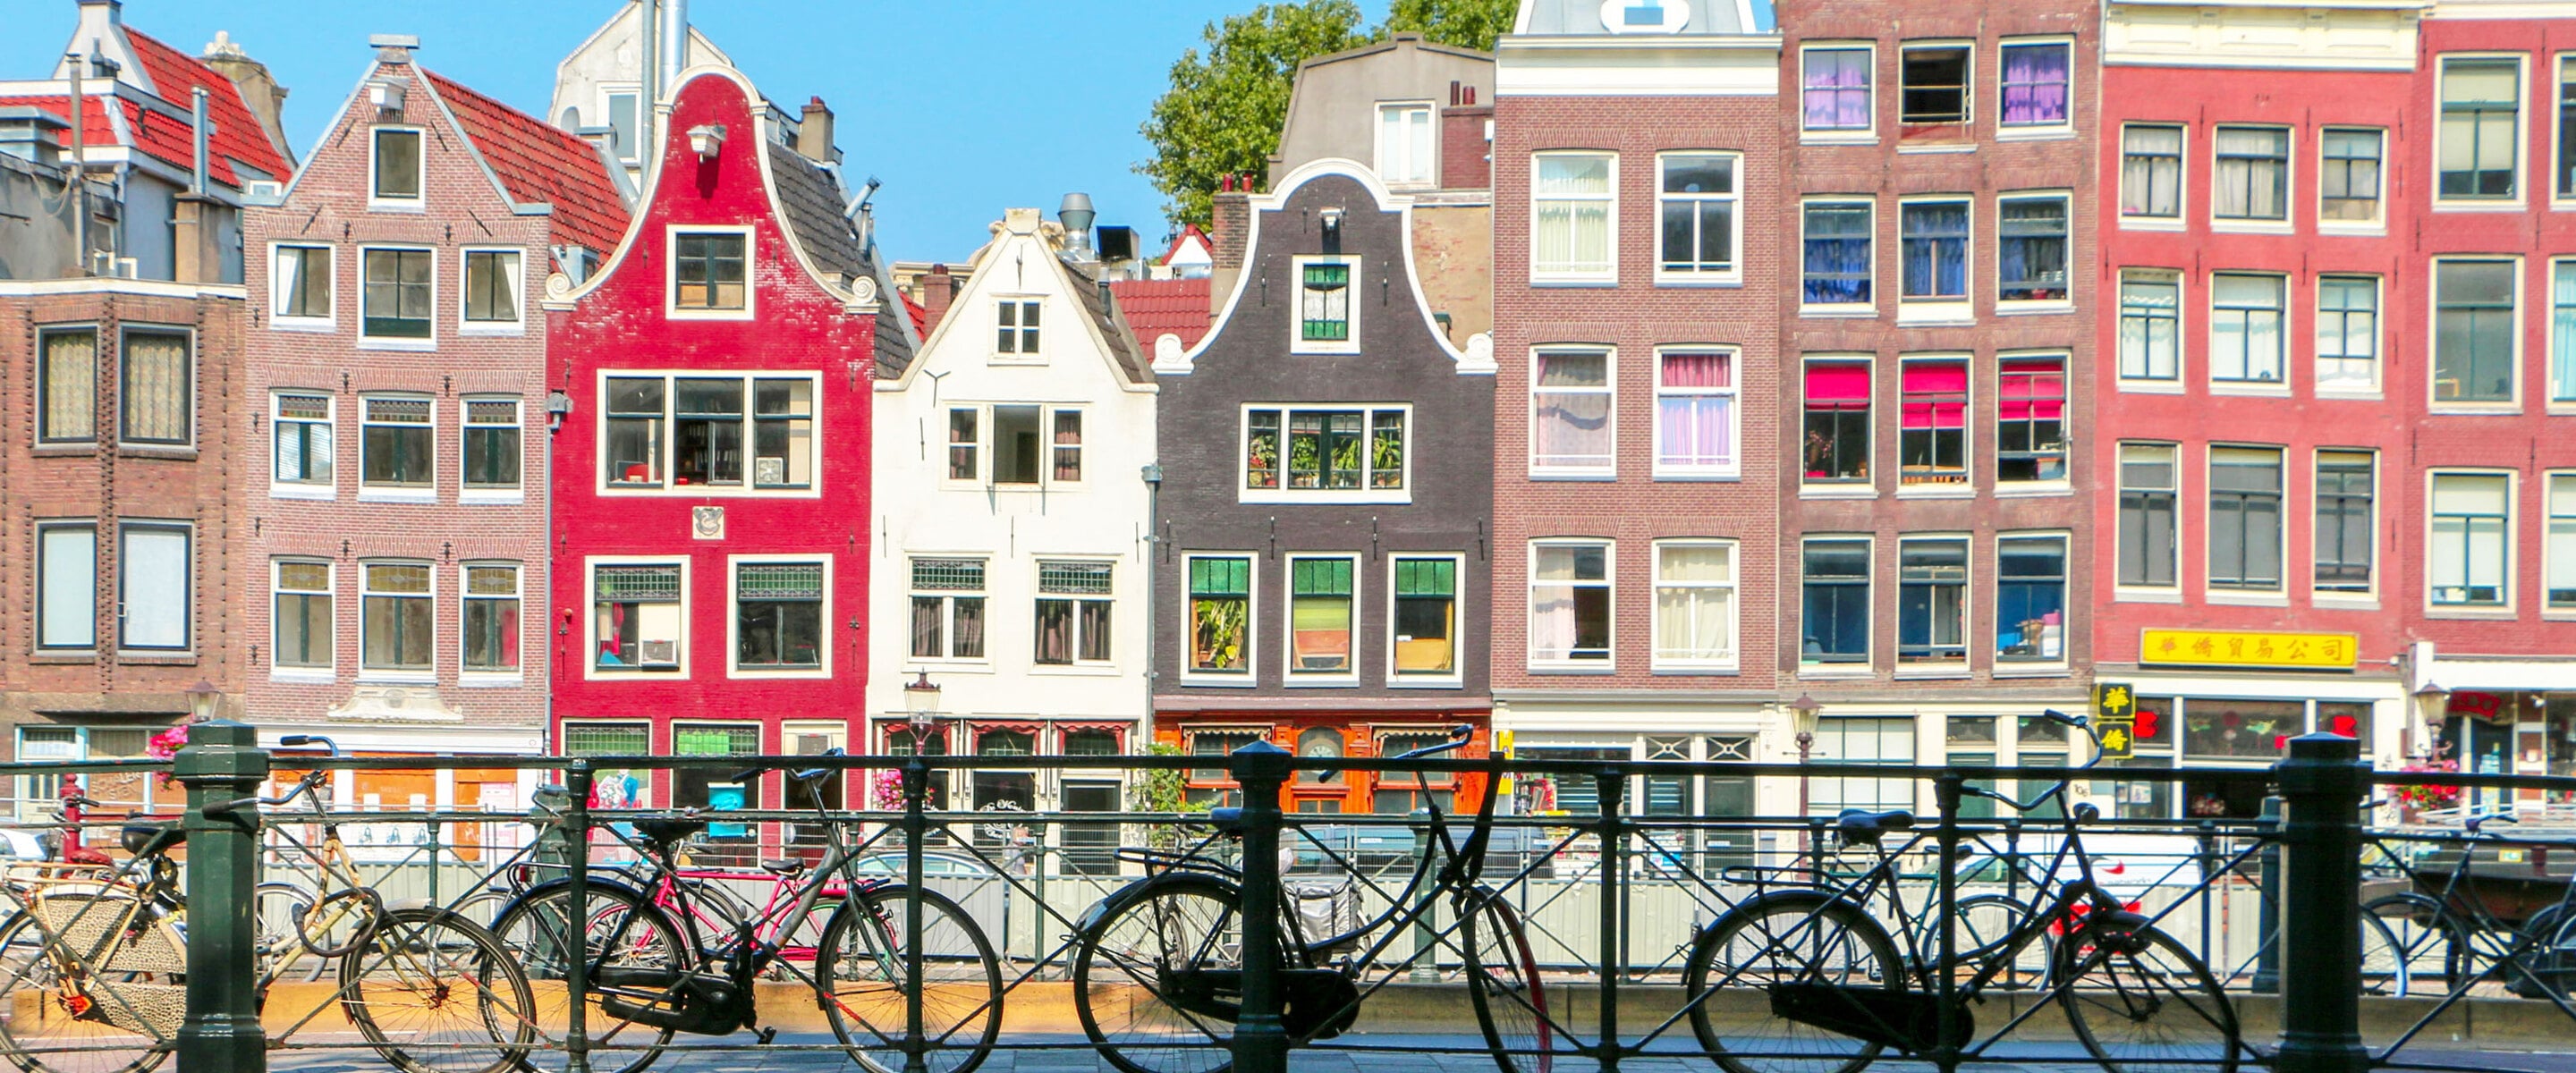 Amsterdam Is Vying With 24 Other Cities for the Title of "Plant-Based Capital"